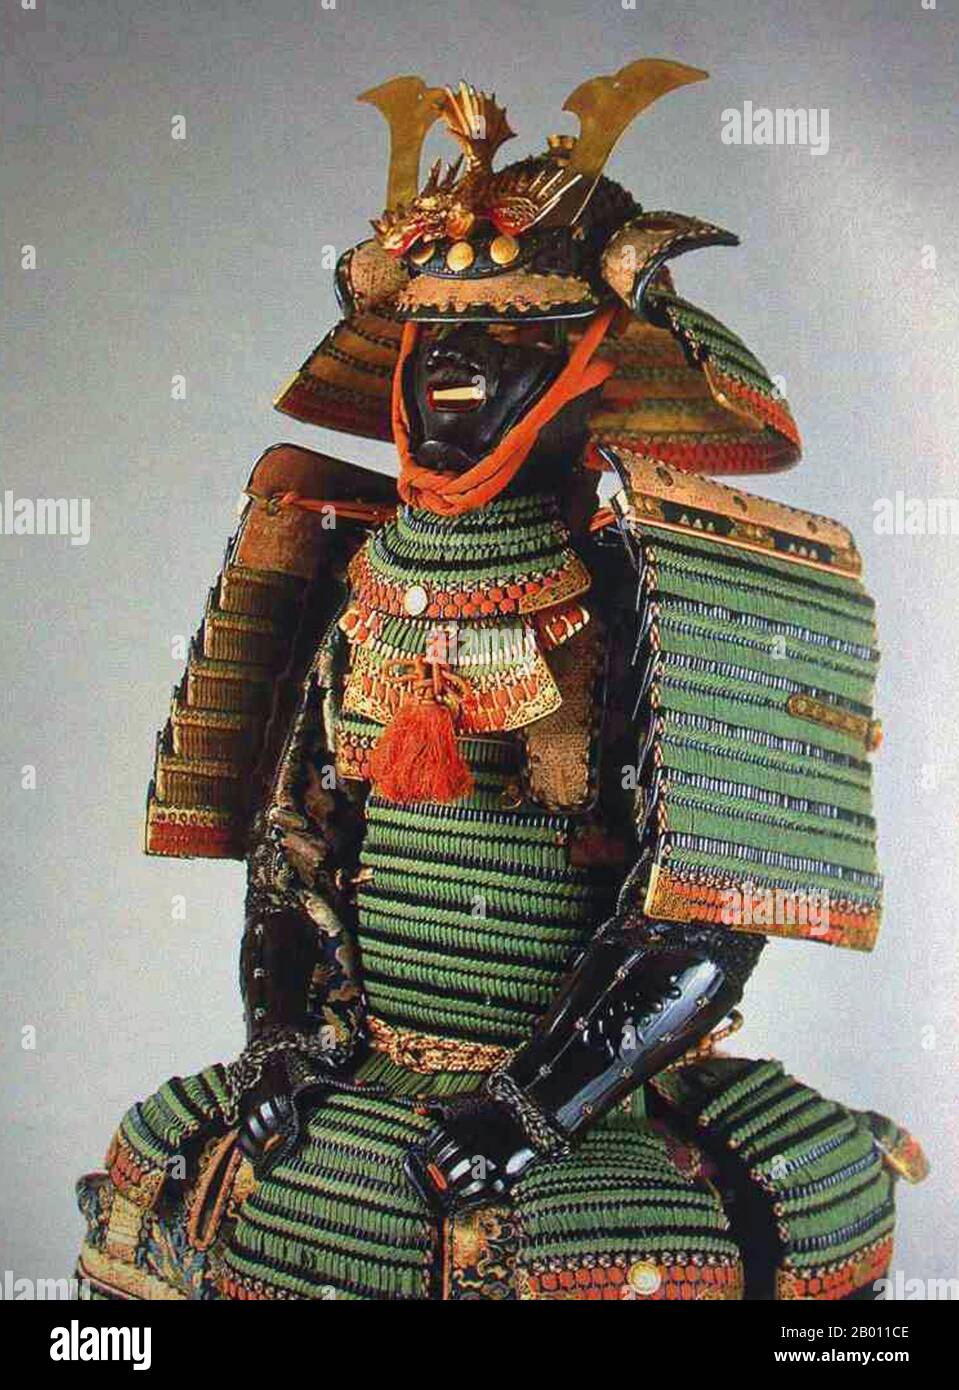 A Suit of Armour to Terrify the Enemy • Japanese Samurai Armour • MyLearning